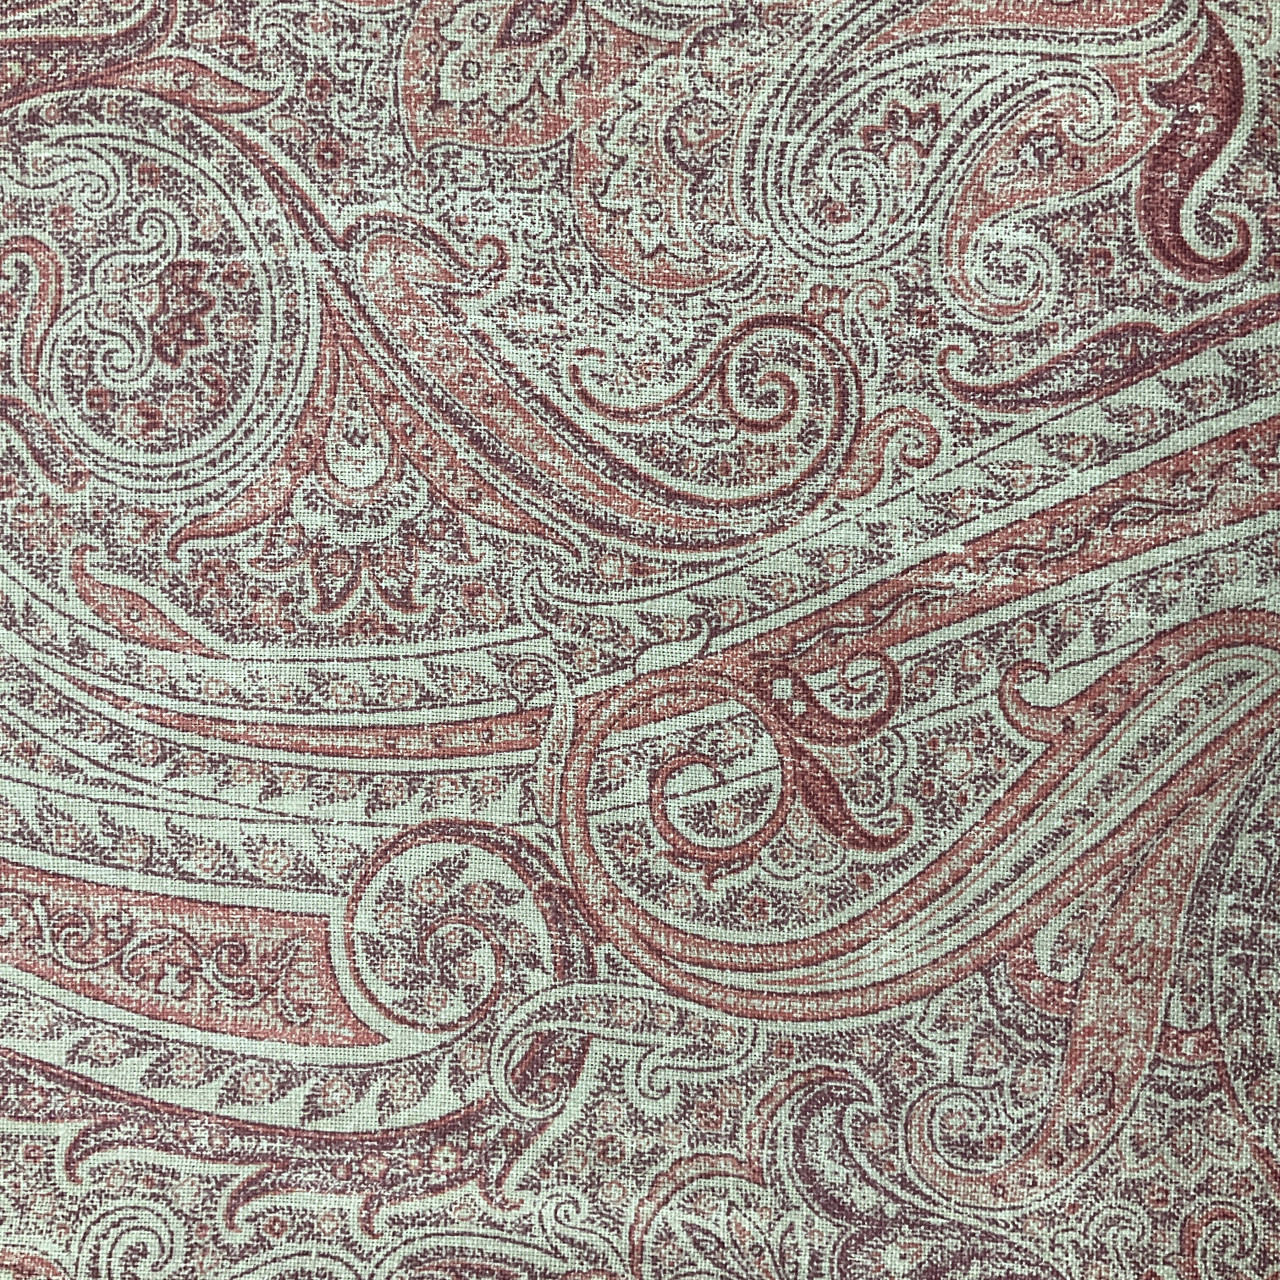 Classic Pattern Styles - Learn To Design Paisley Patterns